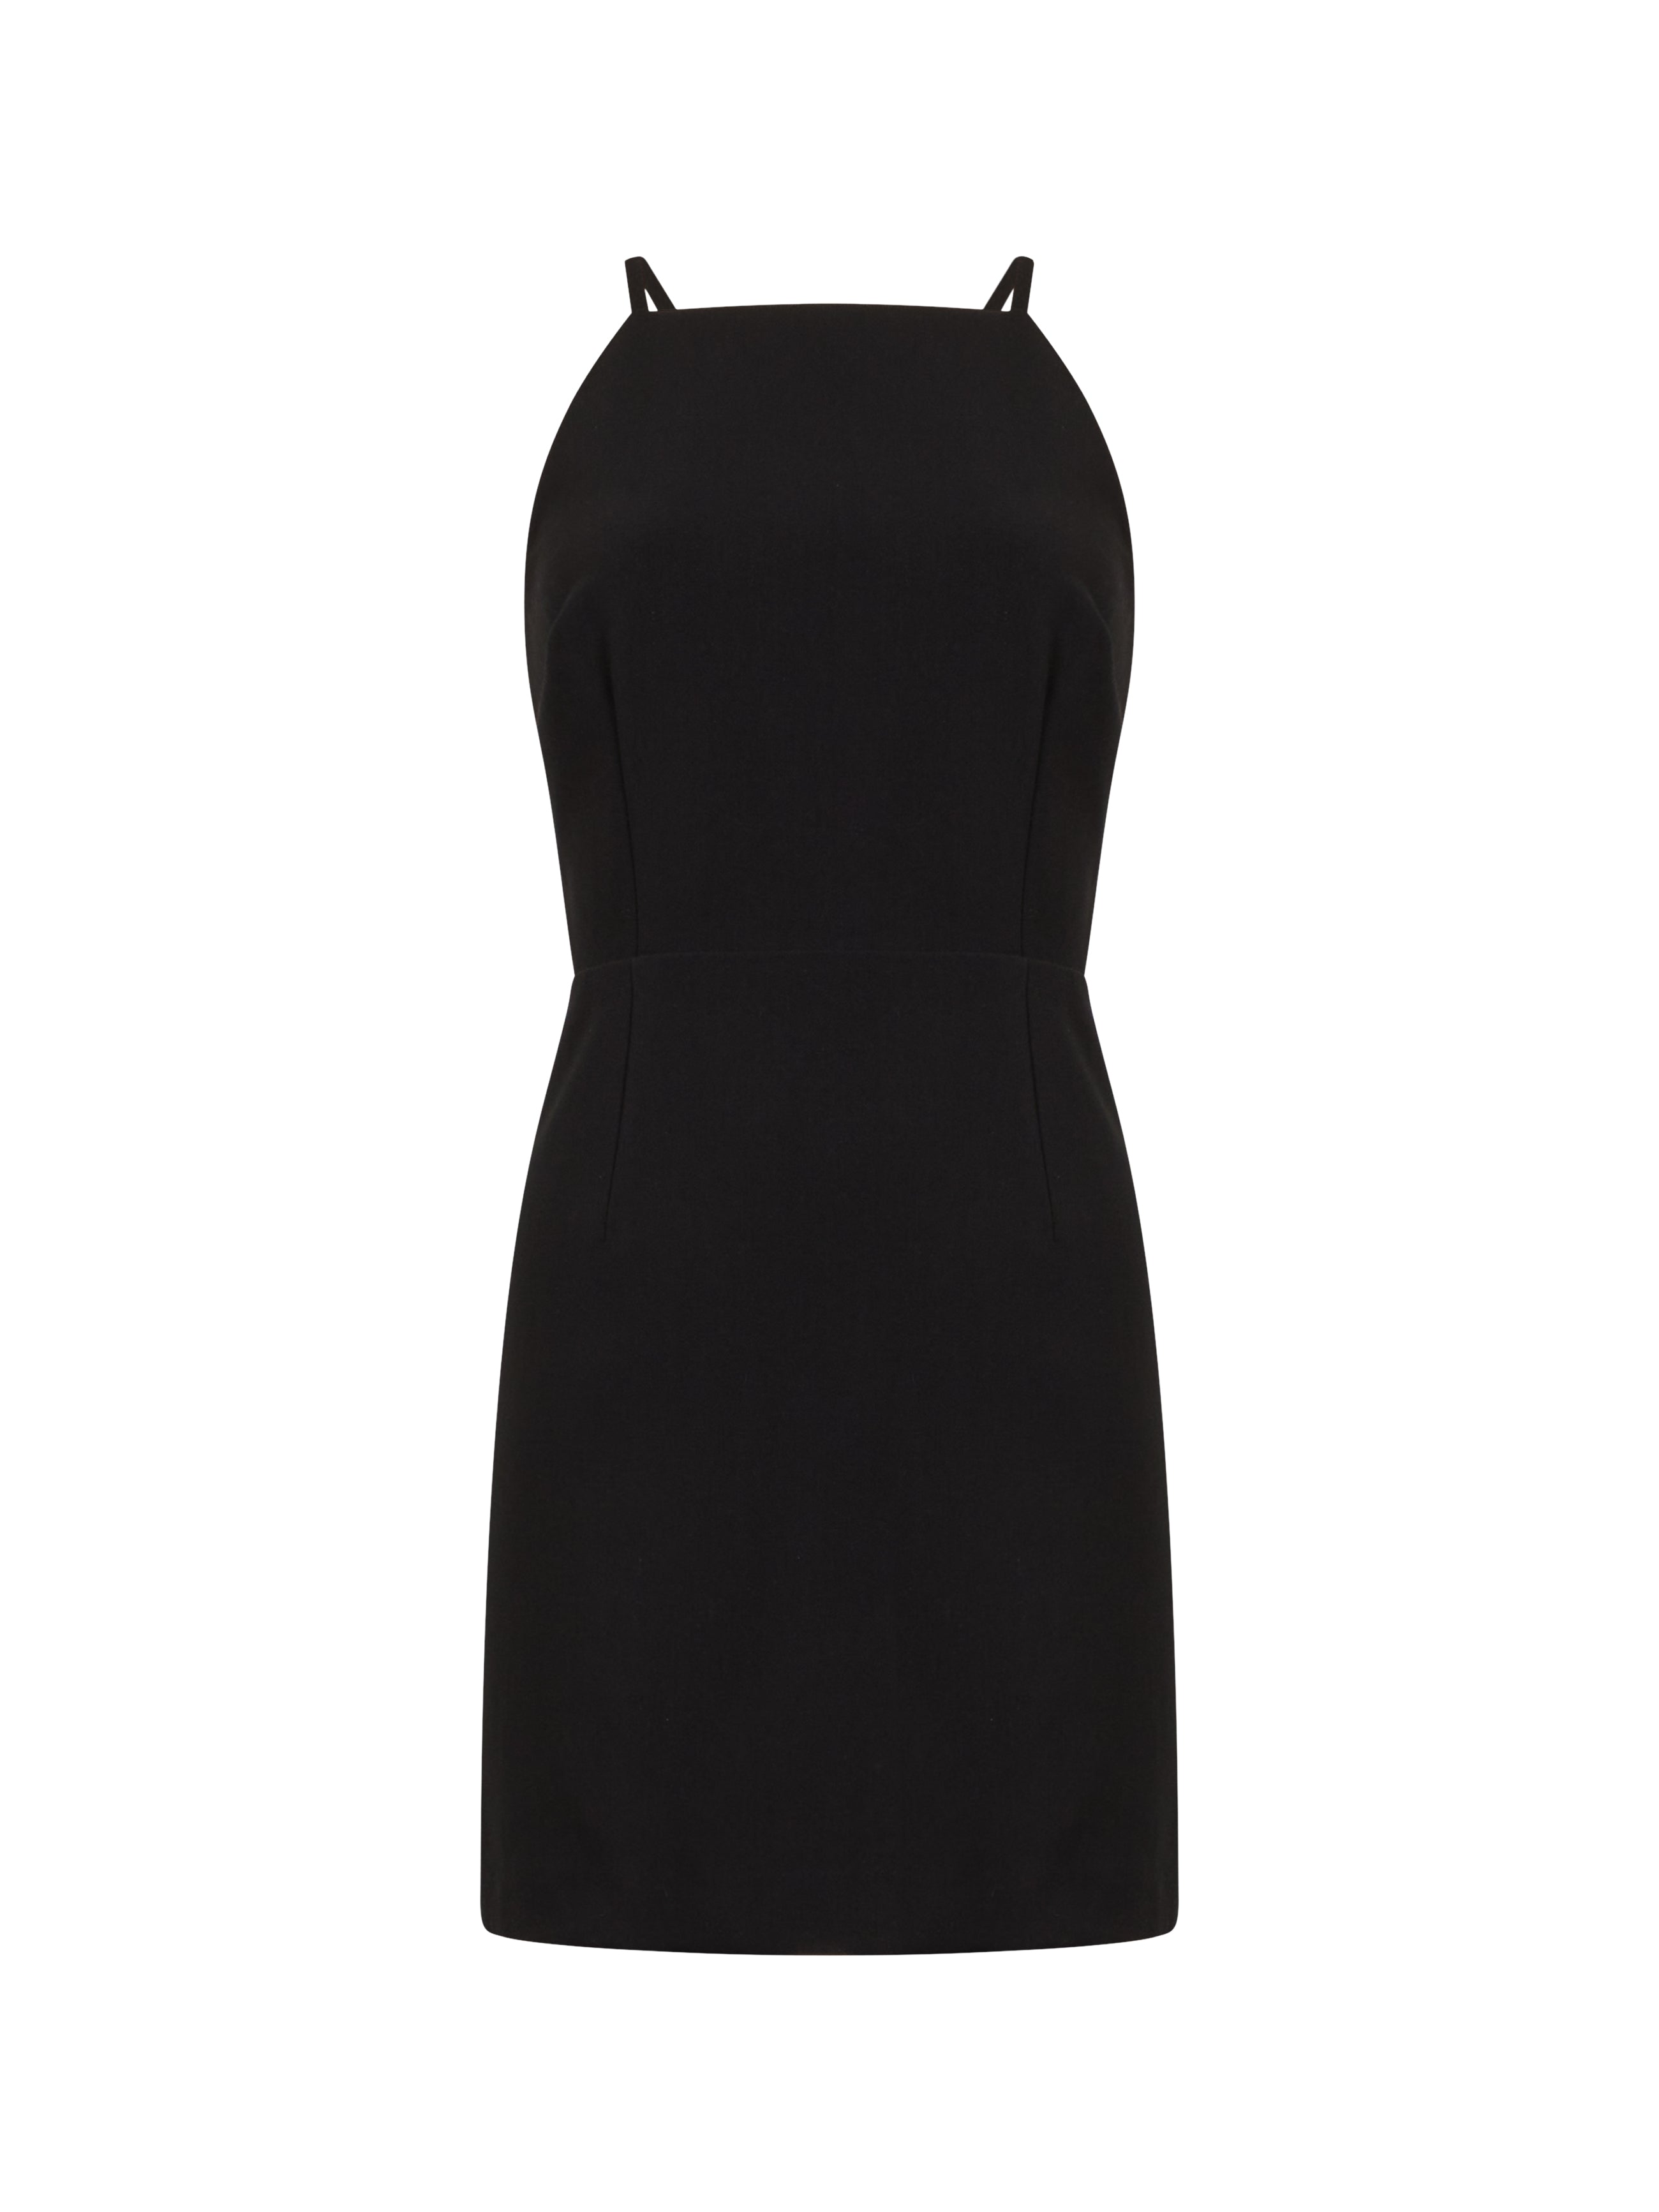 Whisper Cut Out Square Neck Dress Black | French Connection US